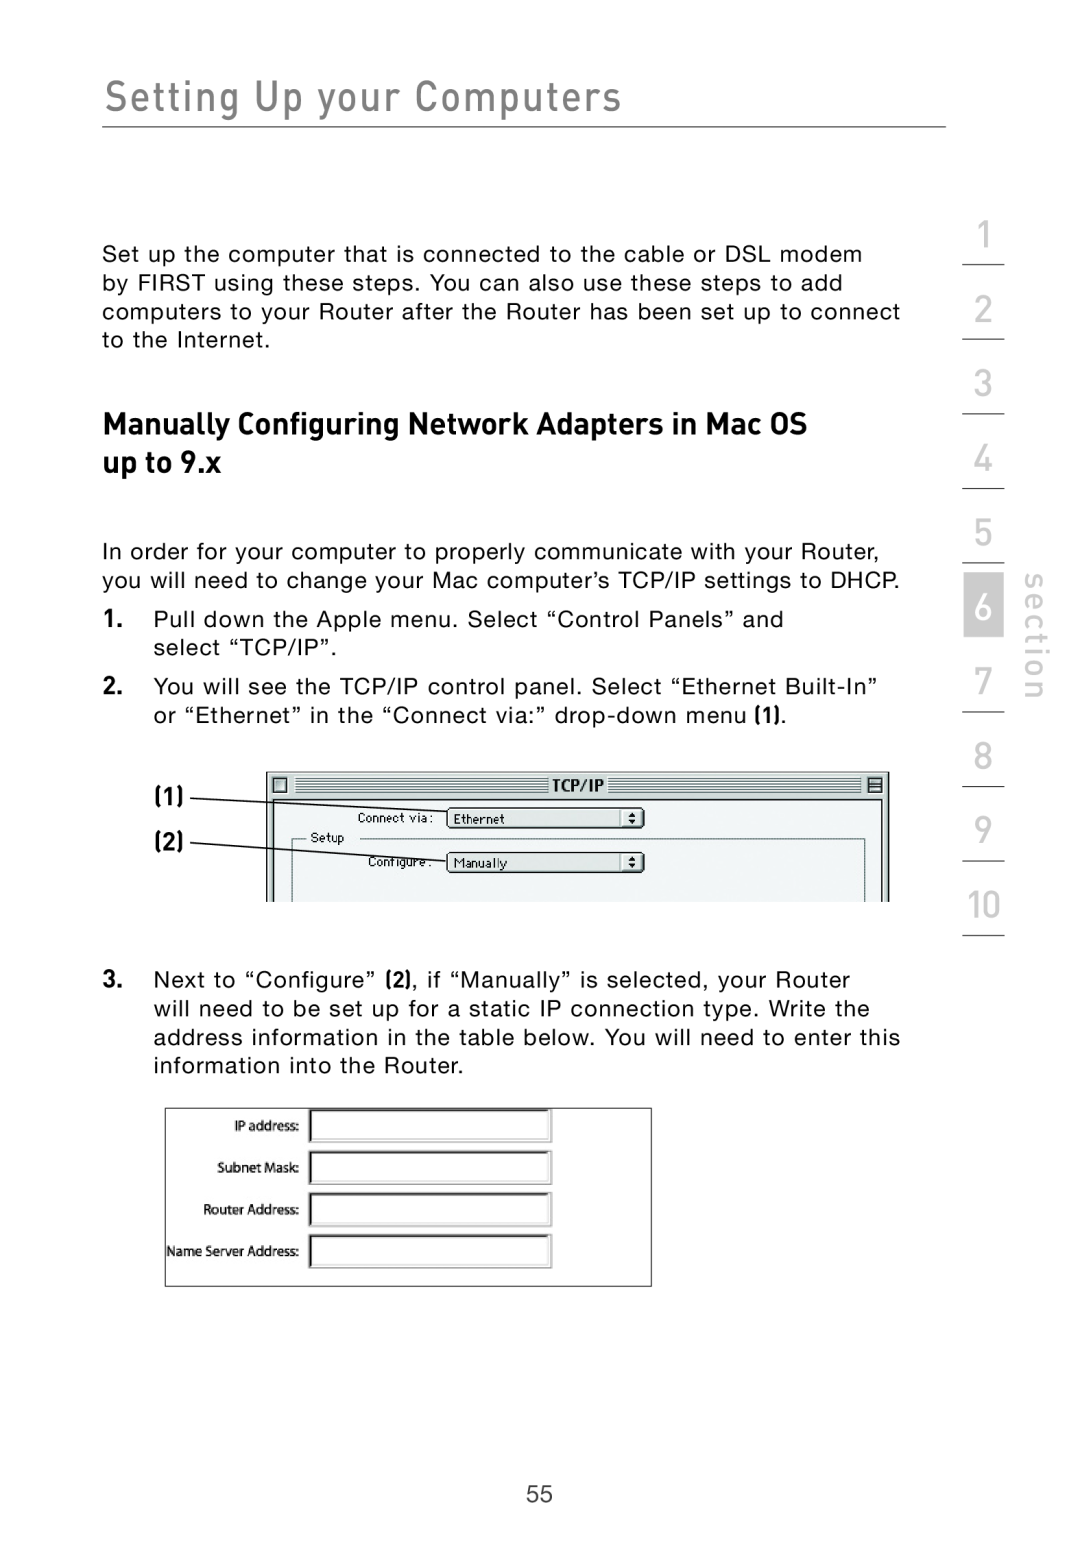 Belkin F5D7632UK4 user manual Manually Configuring Network Adapters in Mac OS up to, Setting Up your Computers, section 